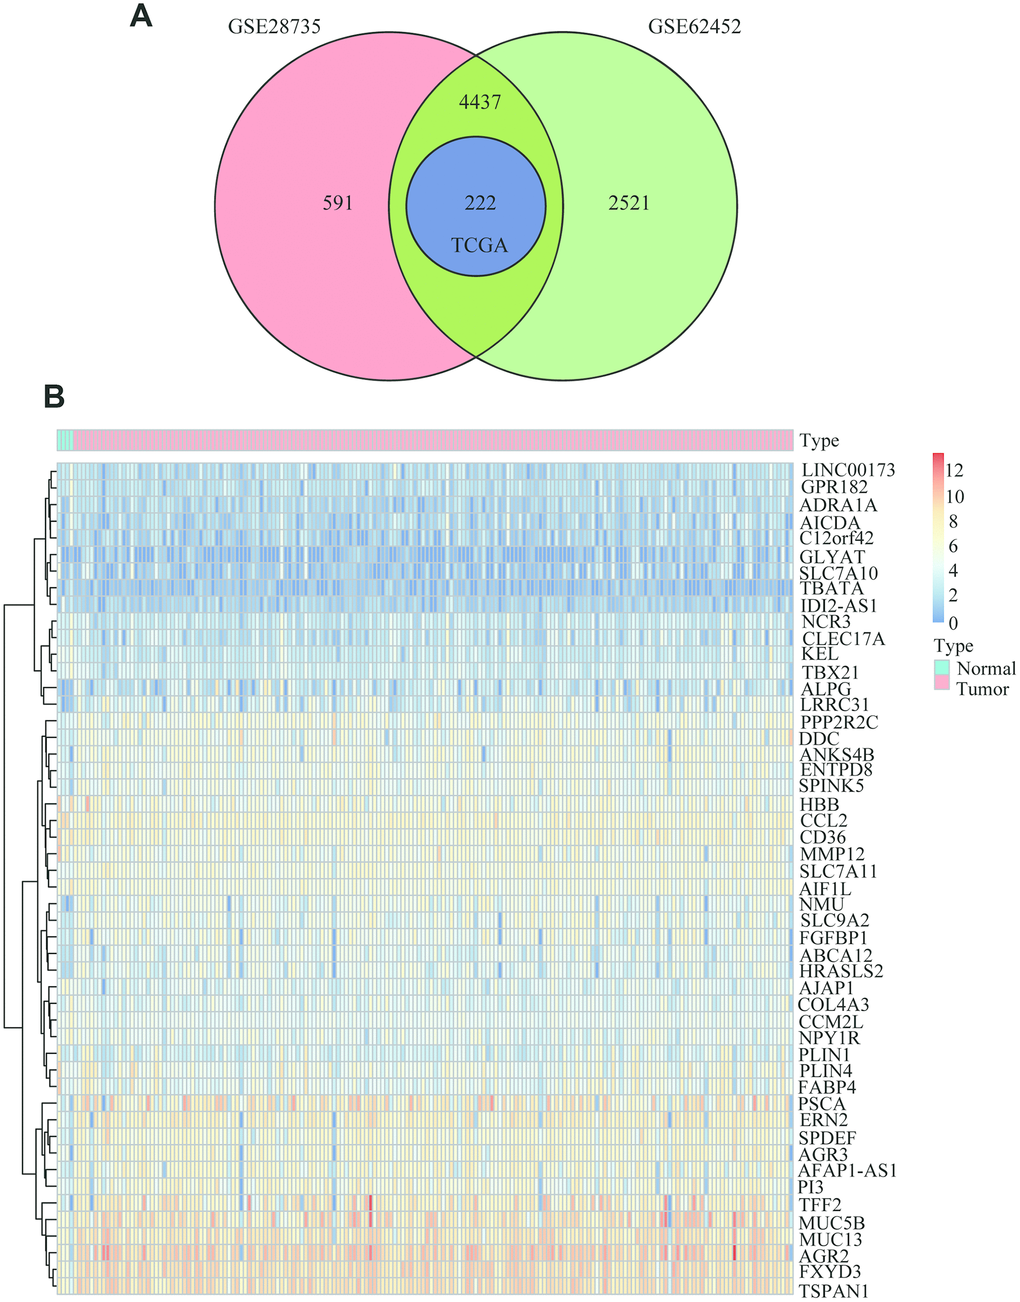 Common differentially expressed genes between PC and normal tissues. (A) Venn diagram showing the common DEGs in PC and adjacent normal tissues from the GSE28735, GSE62452 and TCGA datasets. (B) Heatmap analysis of the 222 DEGs, which contained the 50 highest expressed genes and the 50 the lowest expressed genes according to the log2FC between normal tissues and cancer tissues from the TCGA datasets.